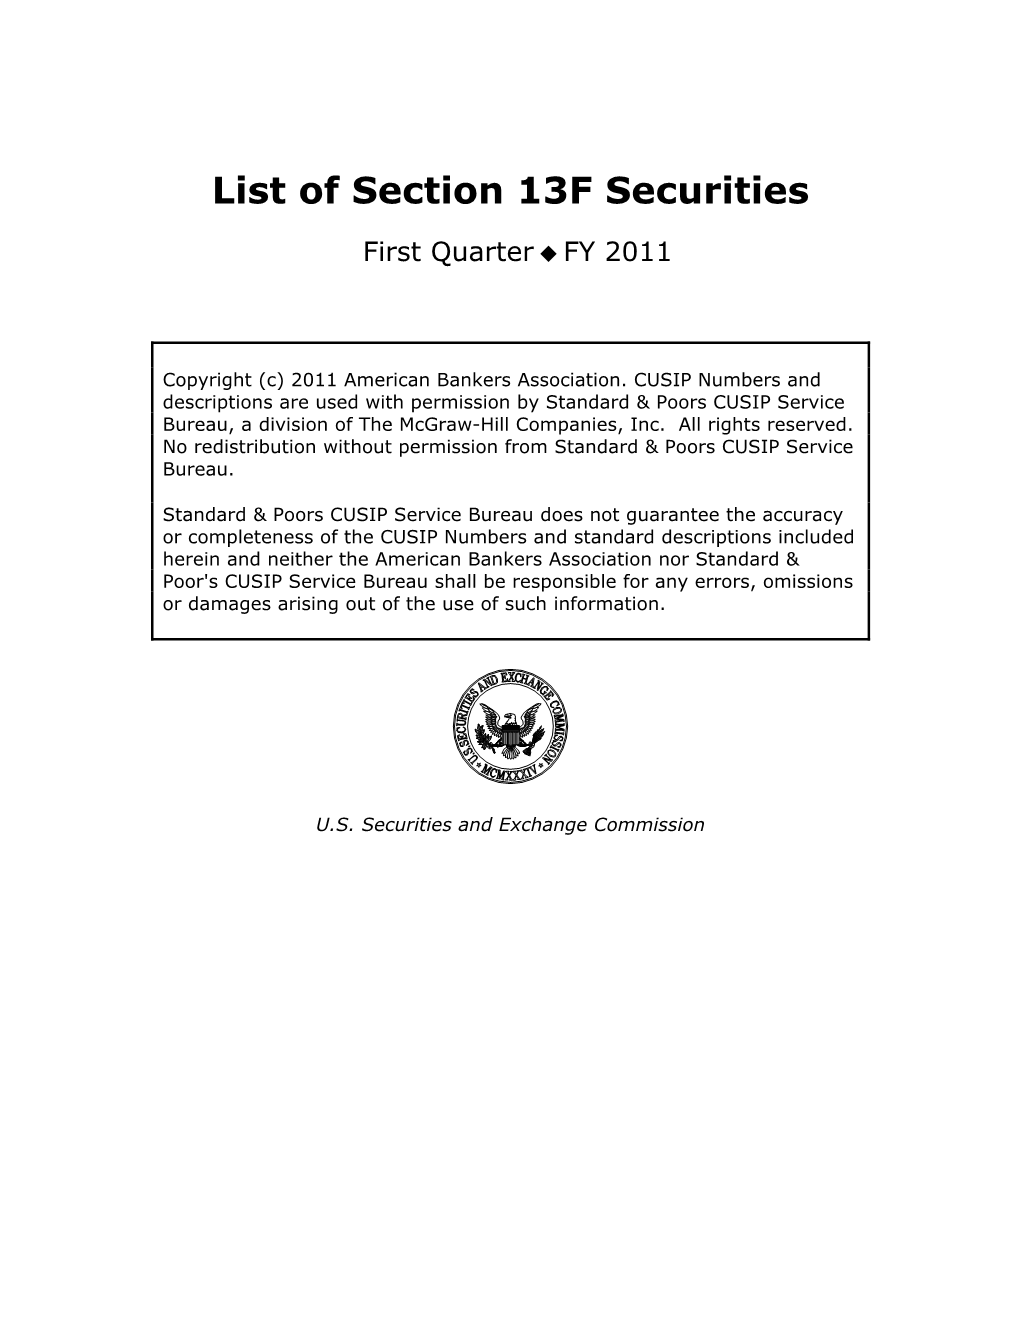 Official List of Section 13(F) Securities Users, First Quarter 2011